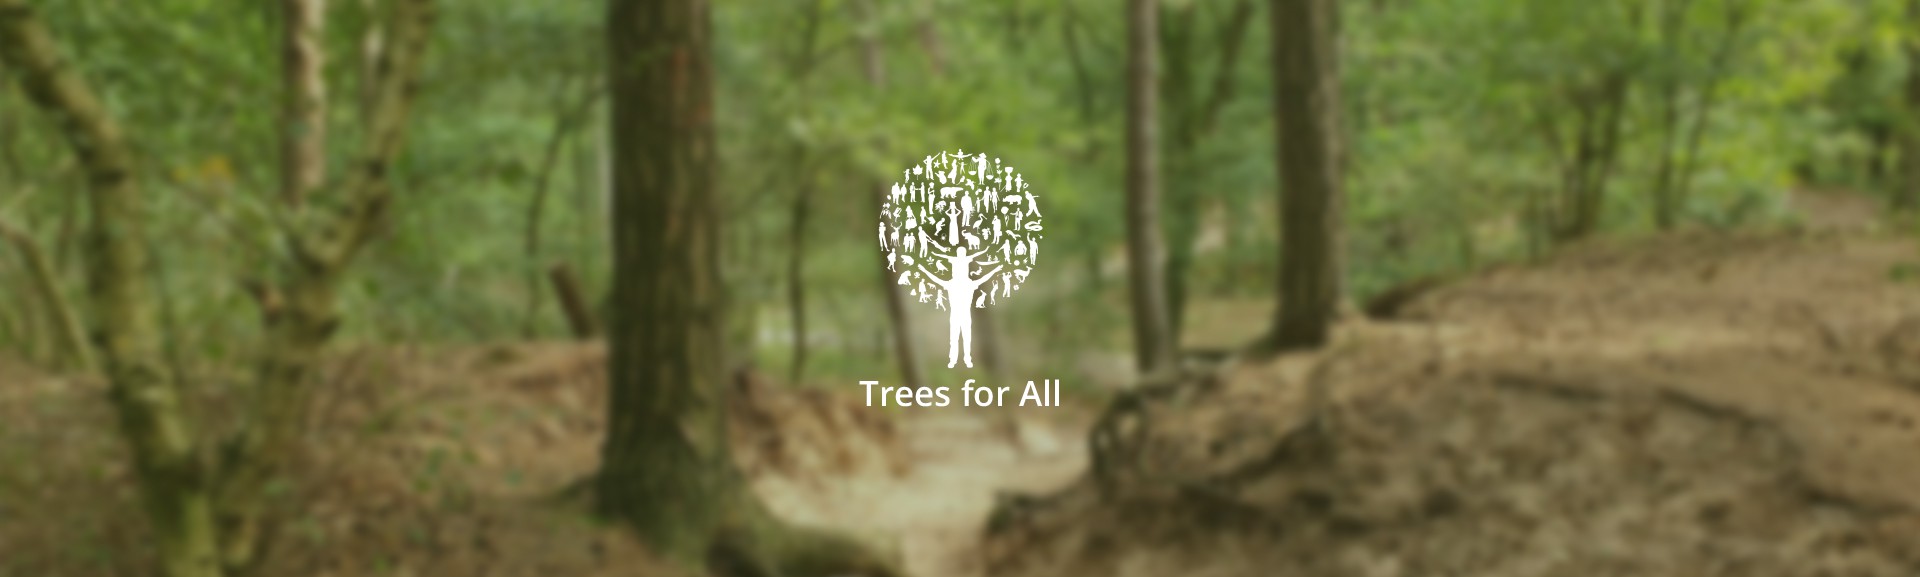 Trees for All